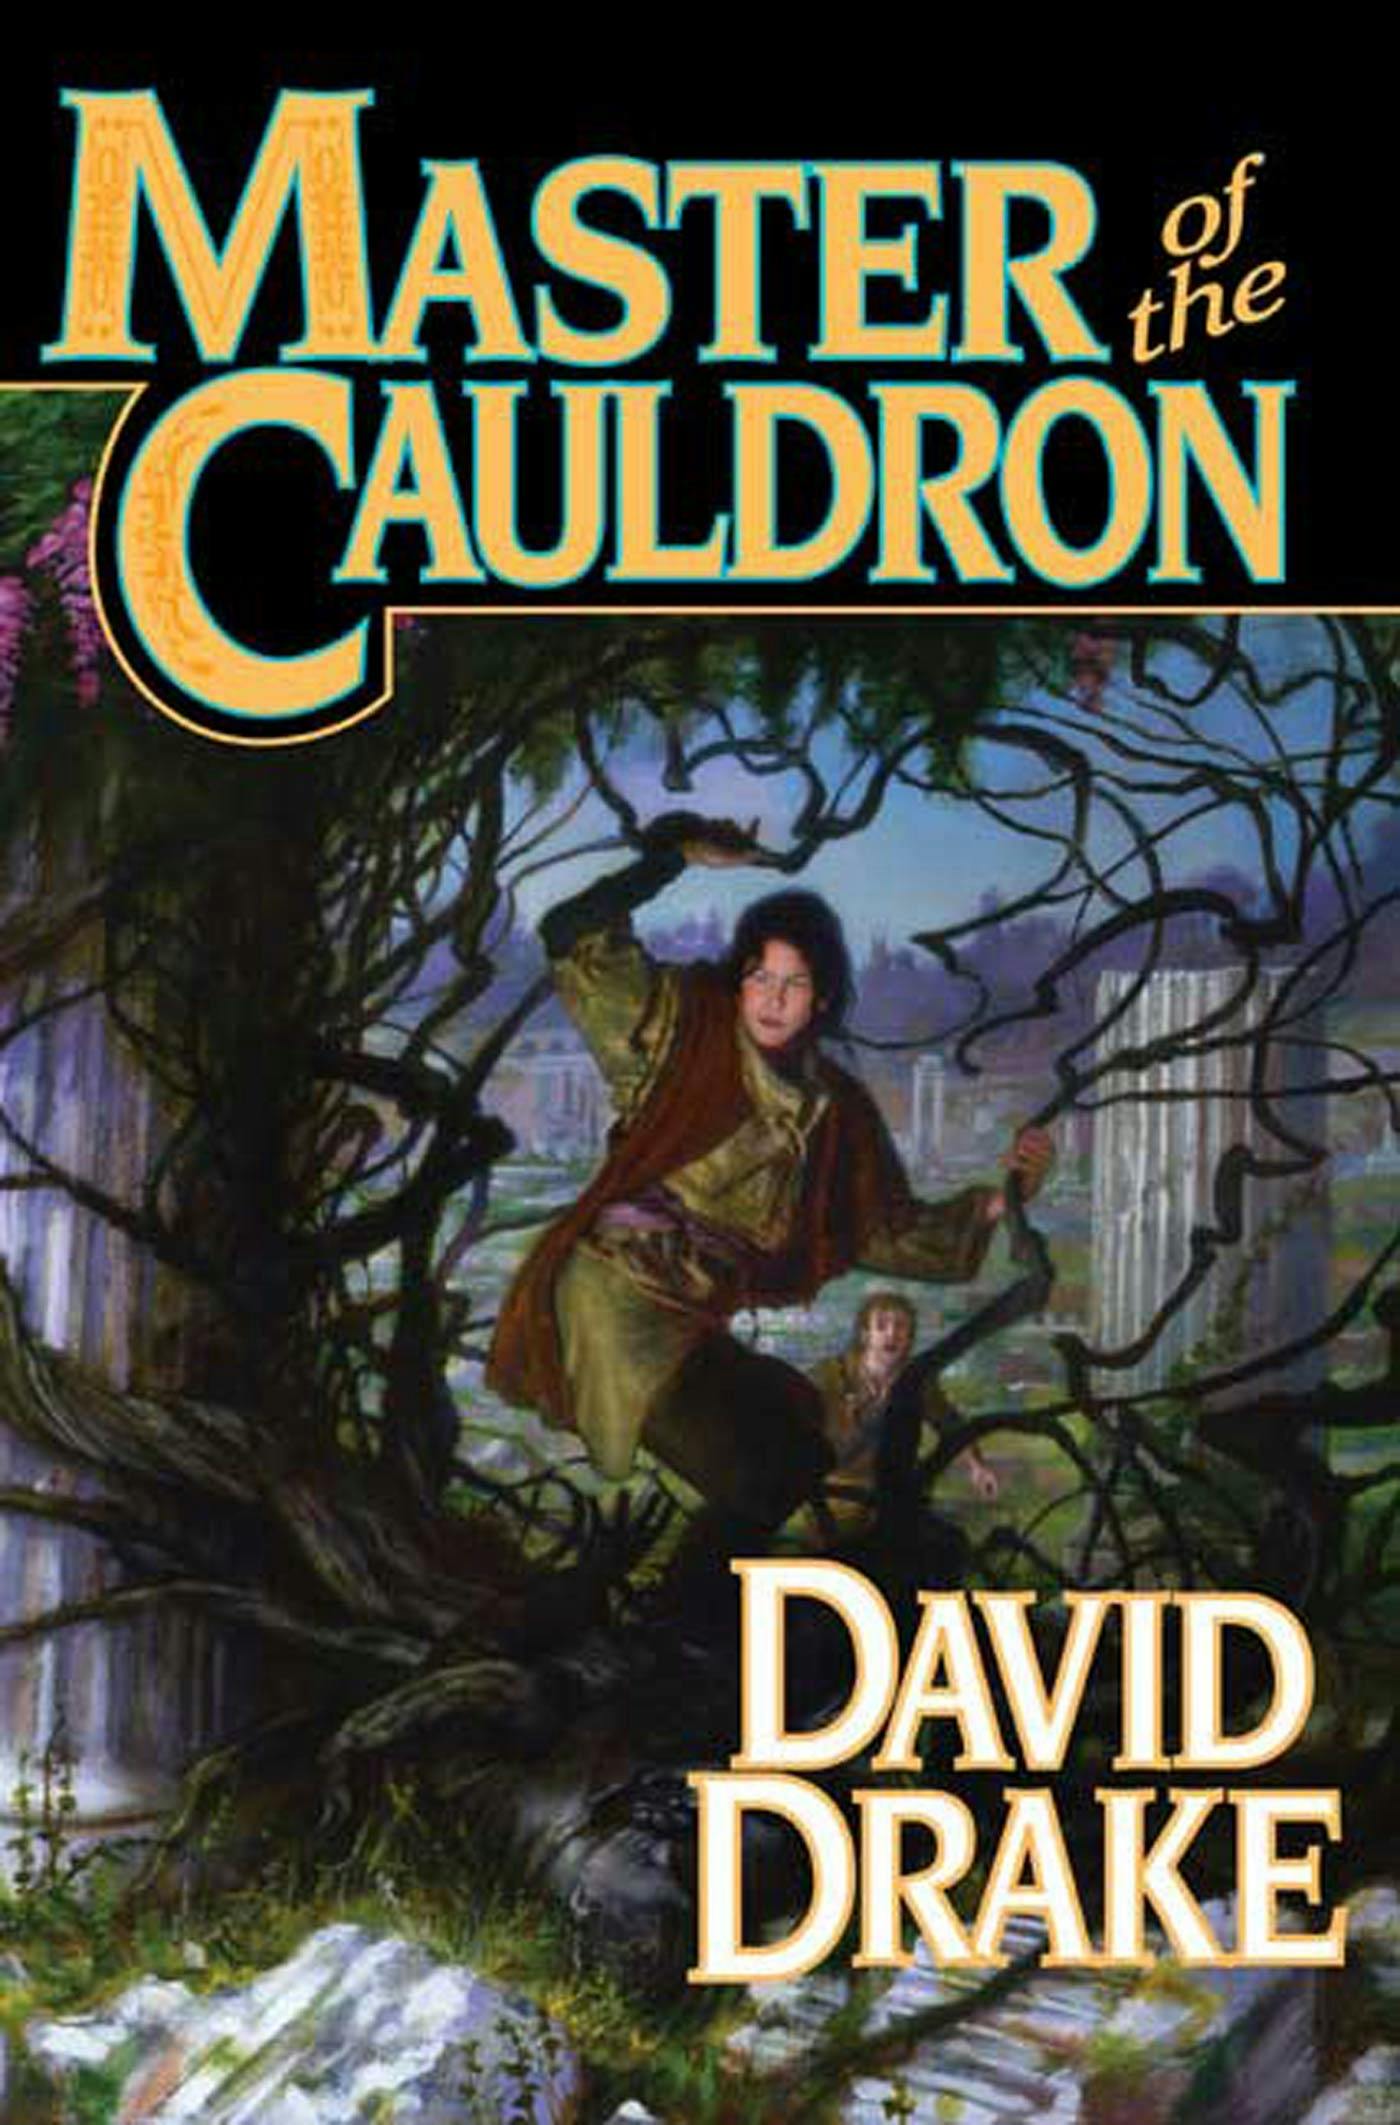 Cover for the book titled as: Master of the Cauldron